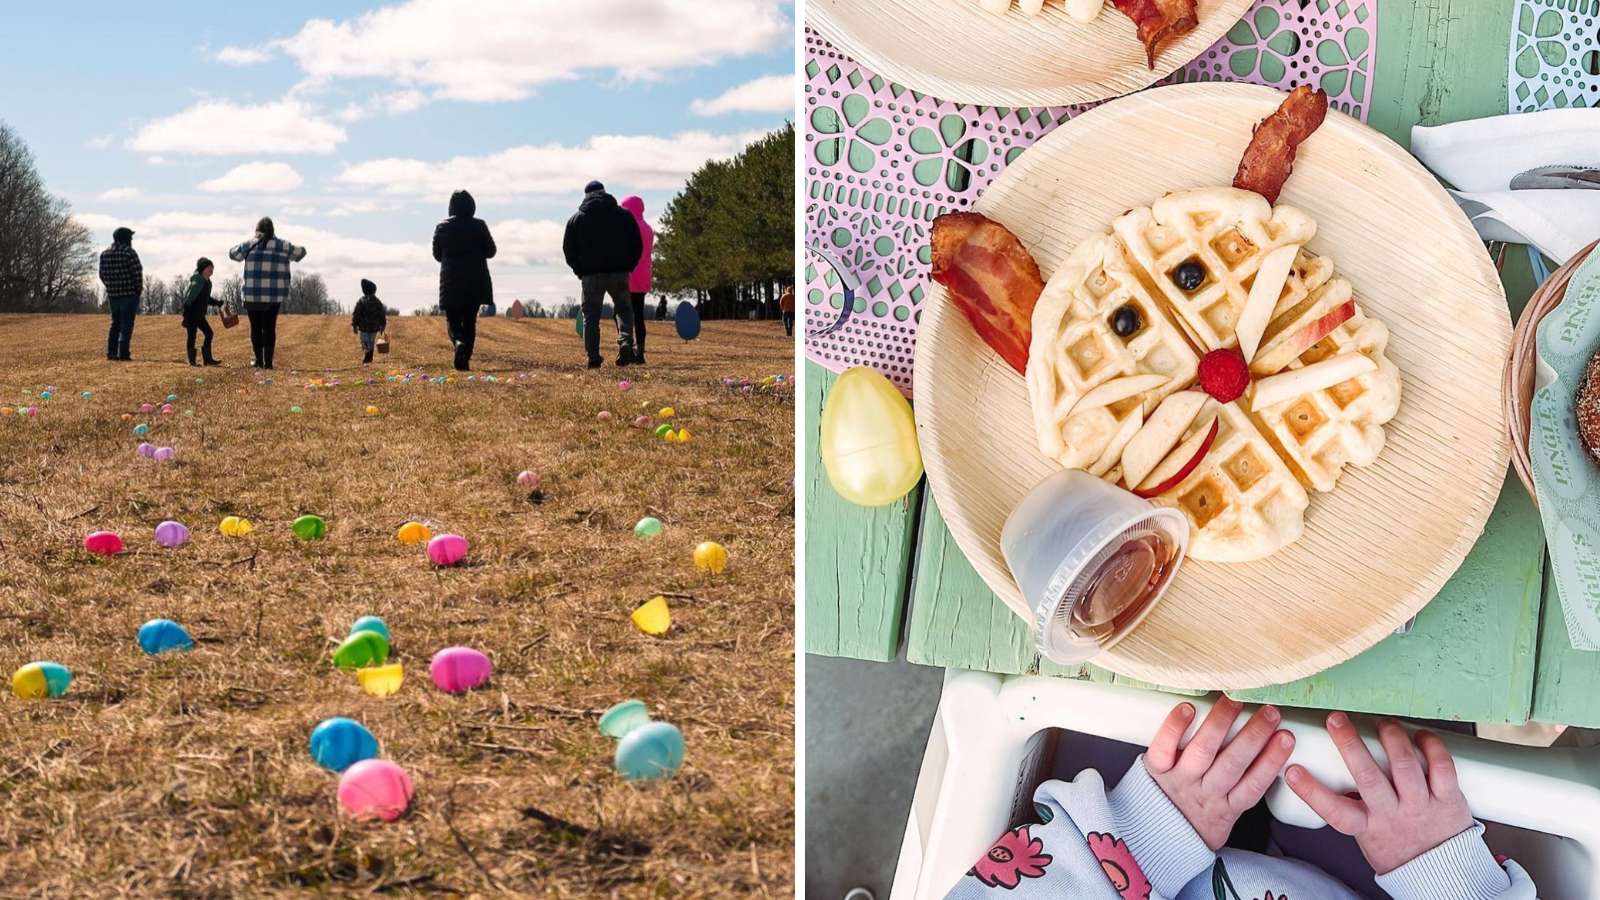 Collage including a photo of an Easter egg hunt and a photo of a waffle garnished to look like a rabbit